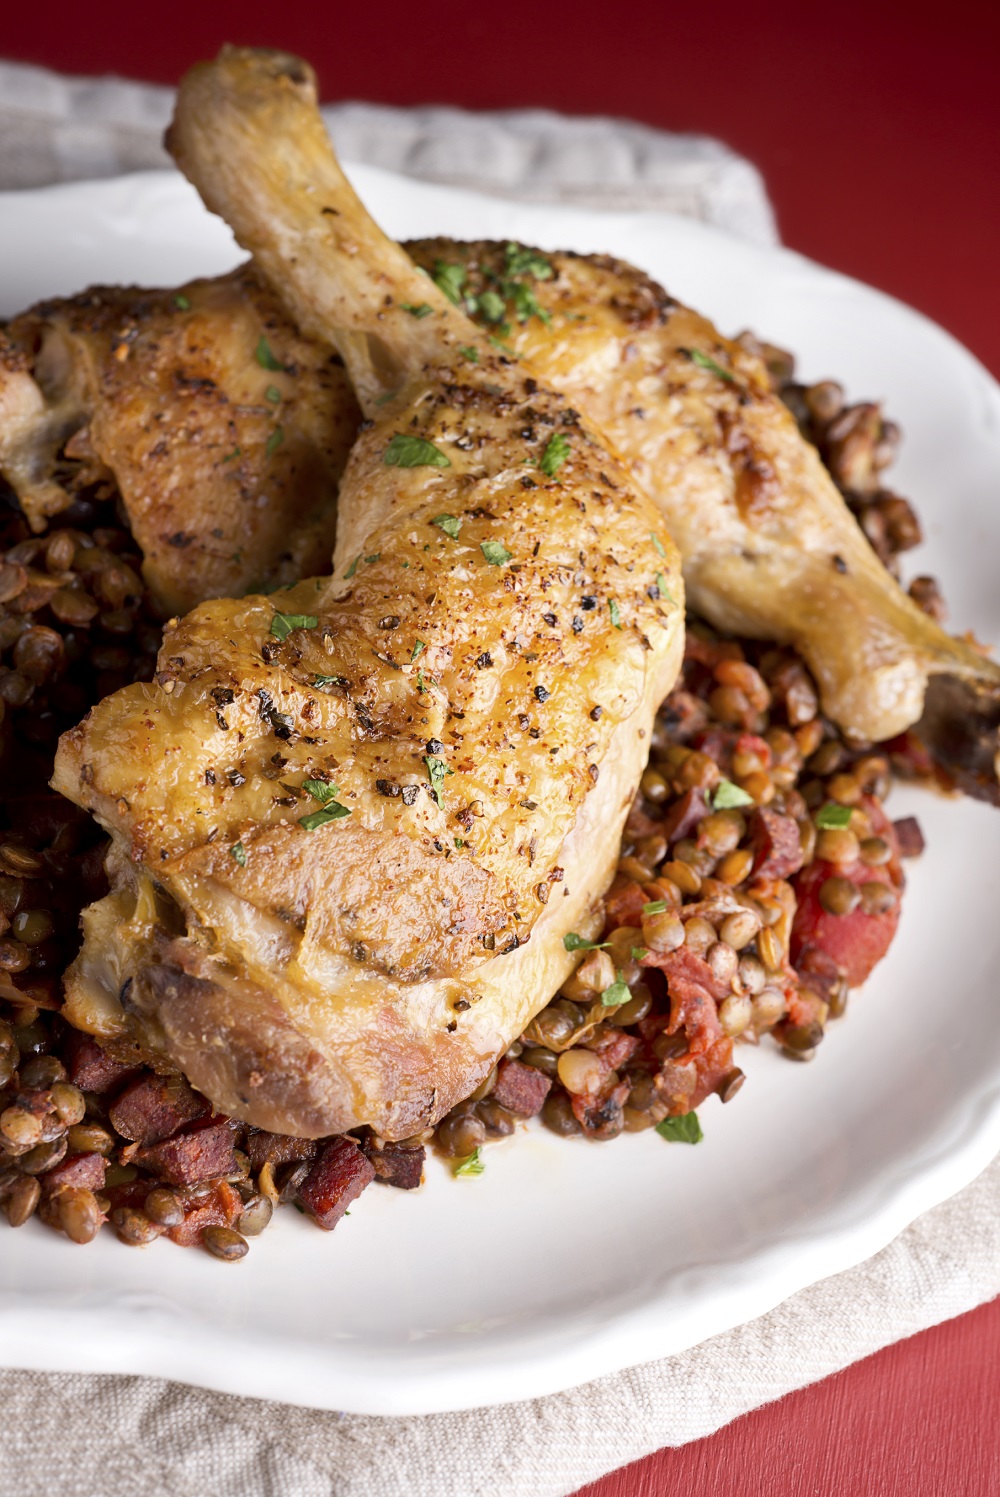 iStock_000037288032_Large - chicken and lentils.jpg